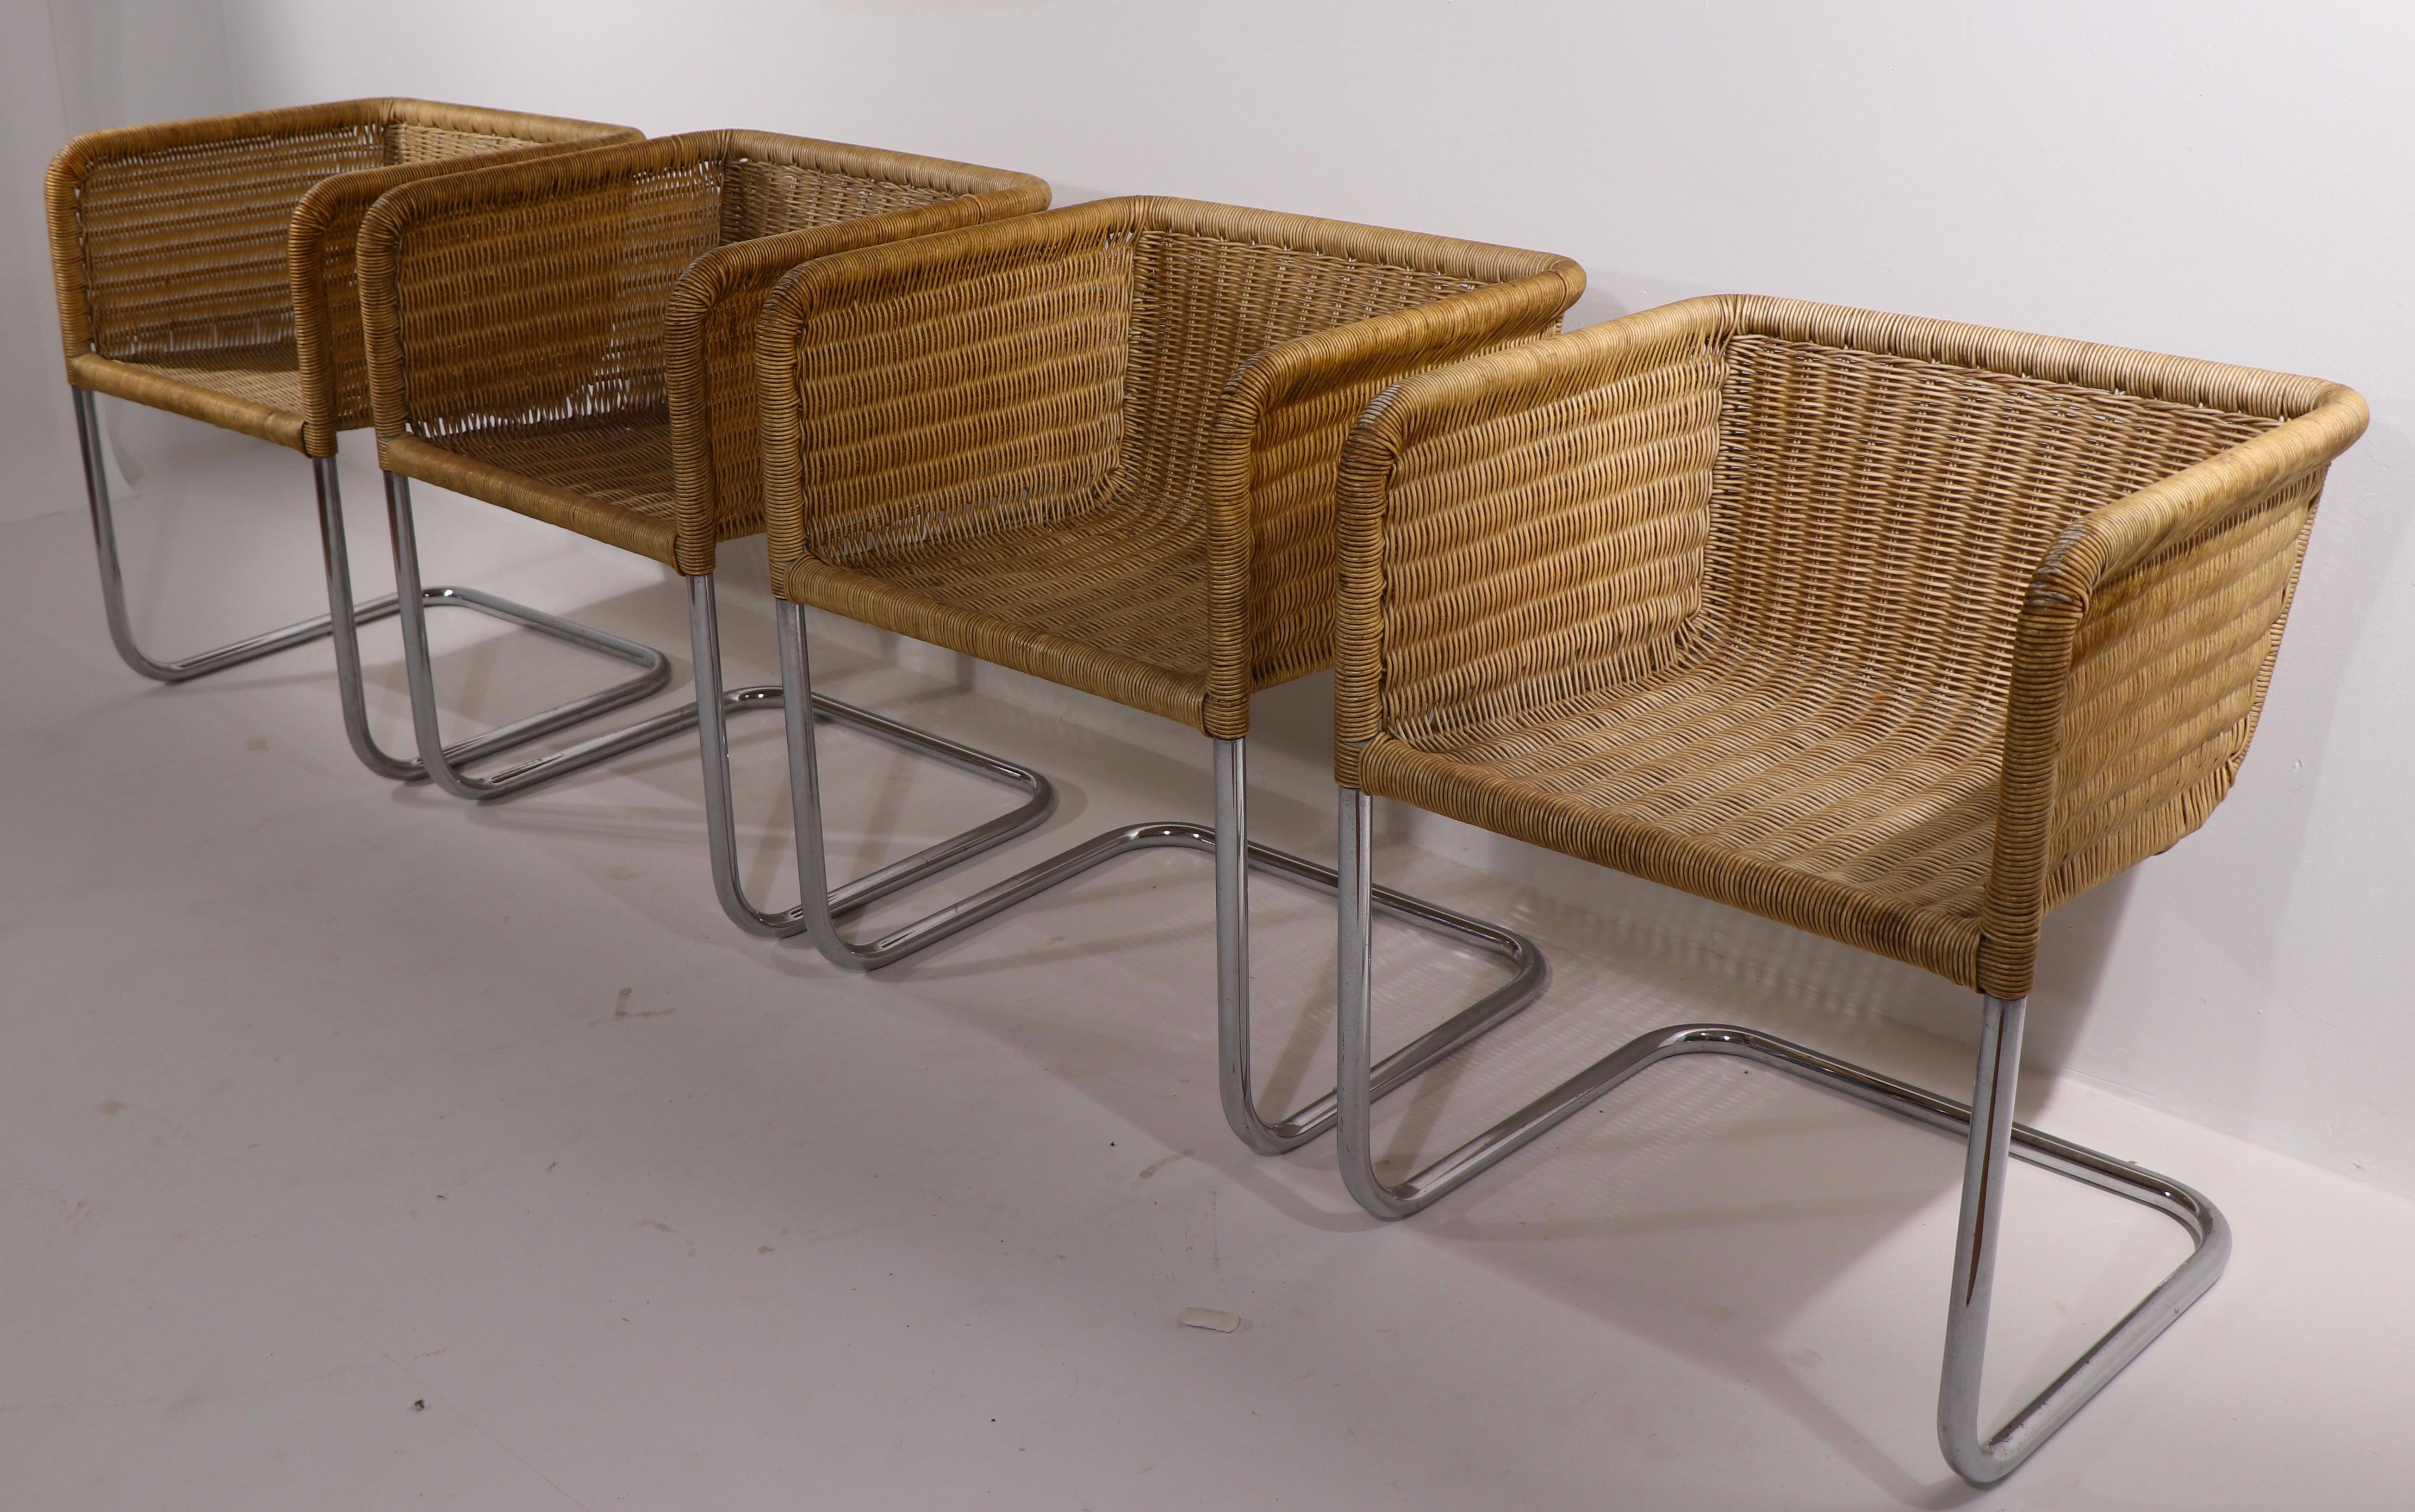 Chic, architectural set of iconic D 43 dining chairs, by Fabricius and Kastholm for Harvey Probber. All four are in good condition, free of damage to the chrome or wicker. The wicker finish has faded over time, to create a nice weathered, but not